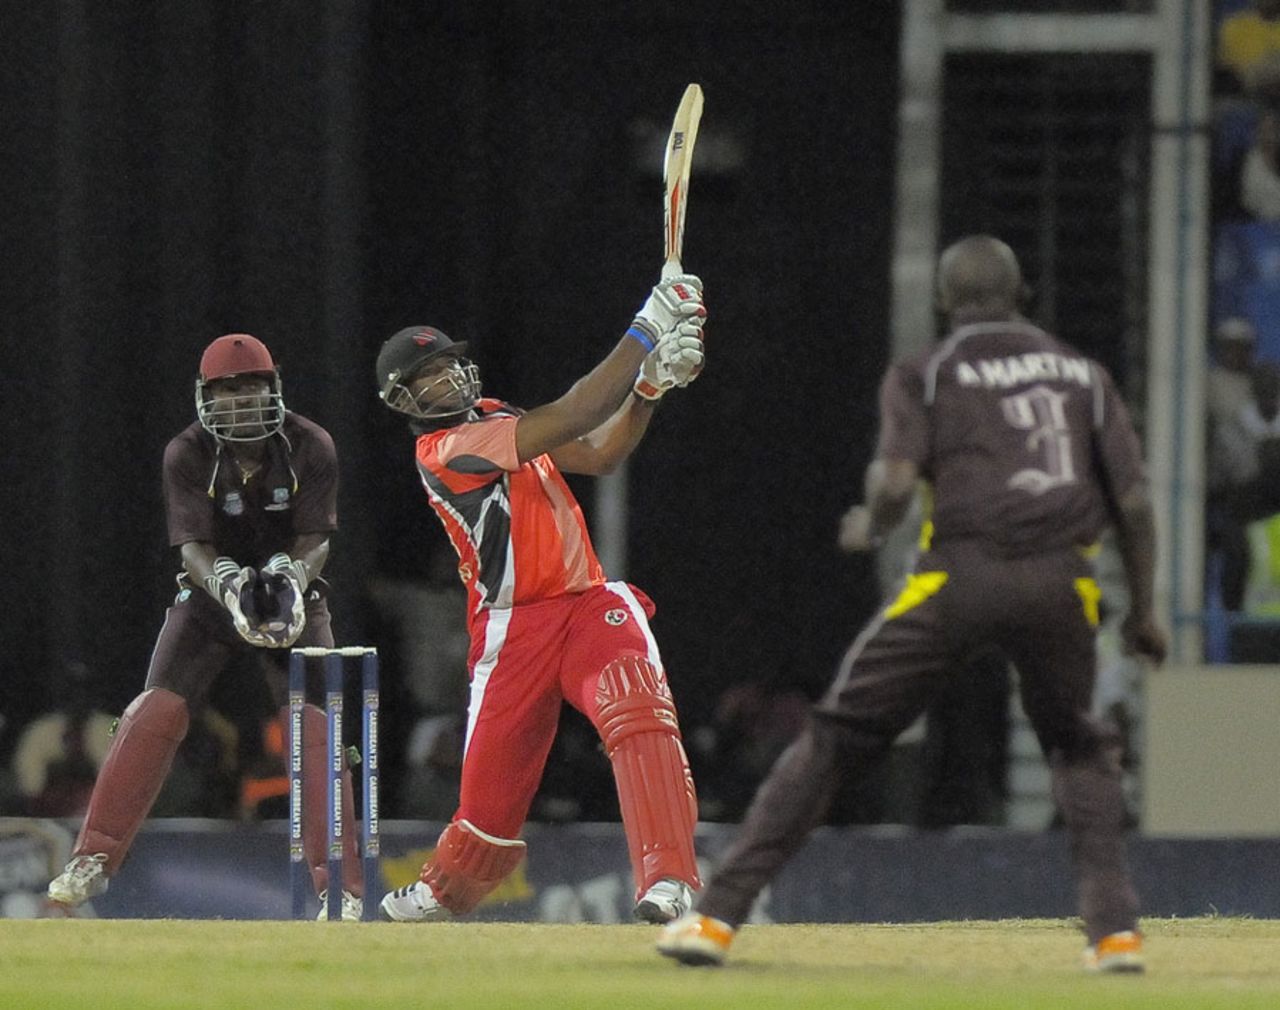 Kieron Pollard during an over in which he hit five sixes, Leeward Islands v Trinidad & Tobago, Caribbean T20 2011-12, Group A match, North Sound, Antigua, January 11, 2012